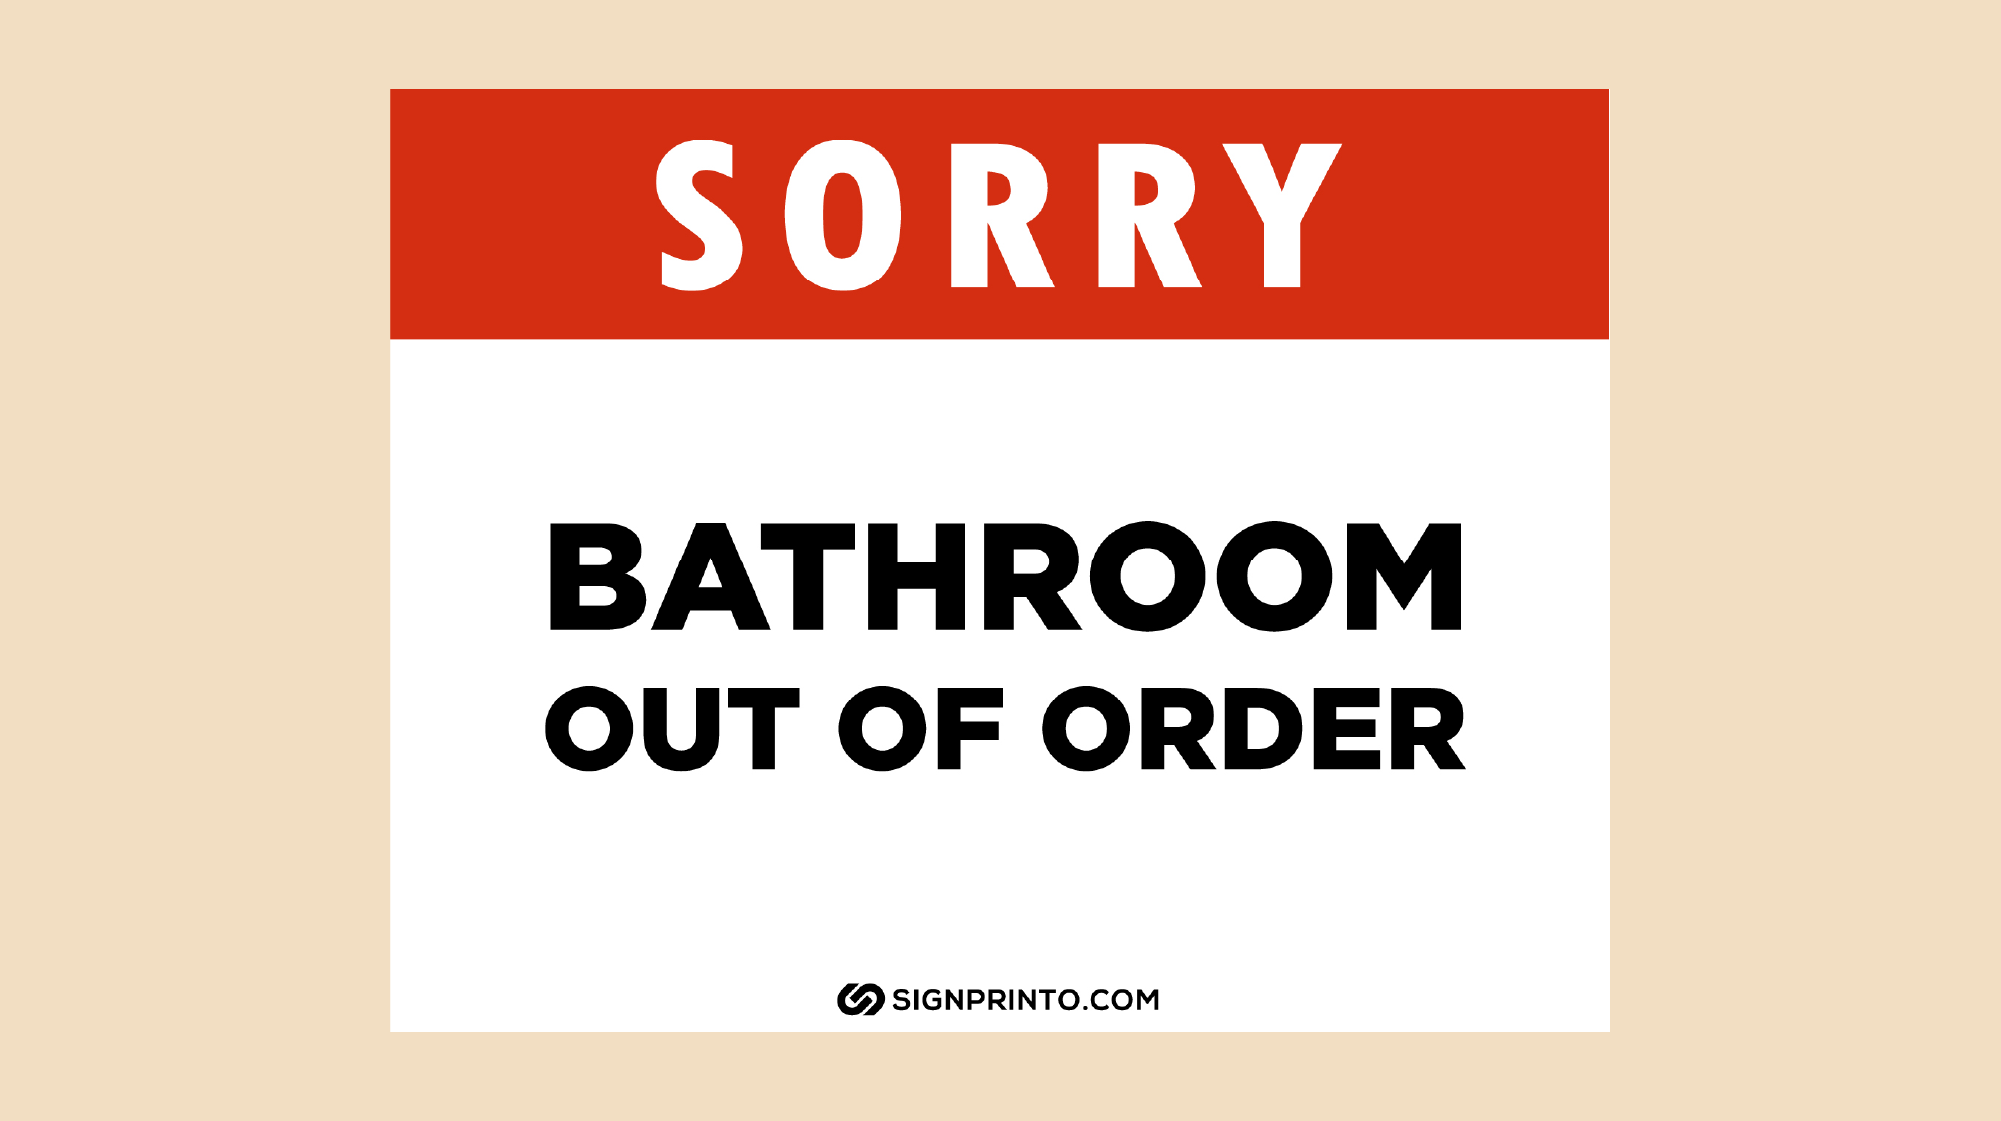 Sorry Bathroom Out of Order Sign